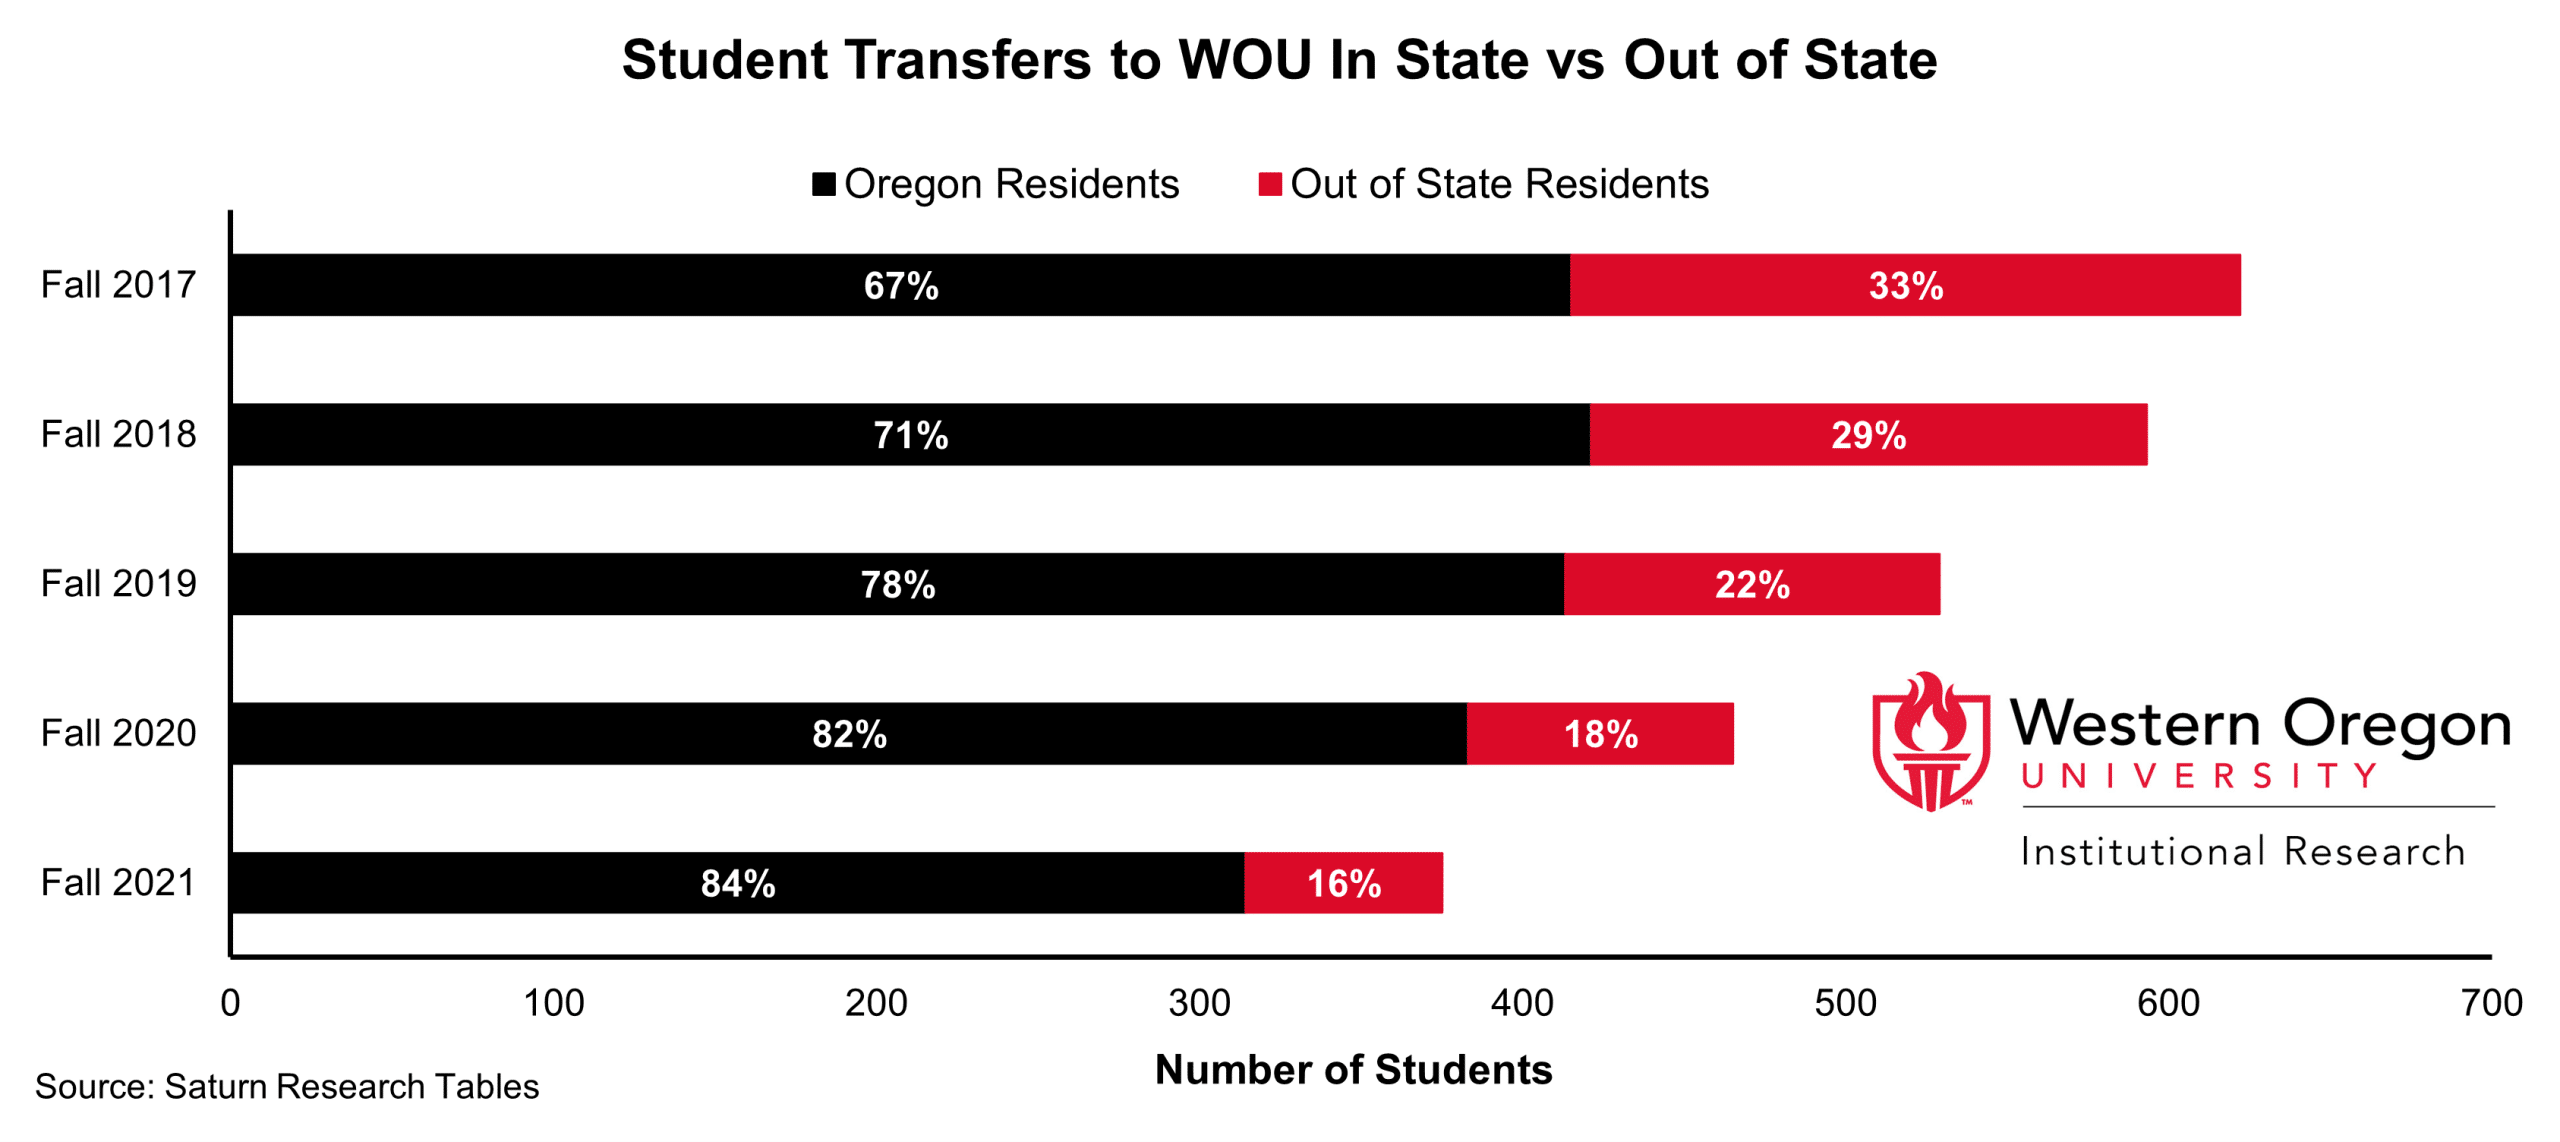 Actual numbers of transfer students and percentages by residency status